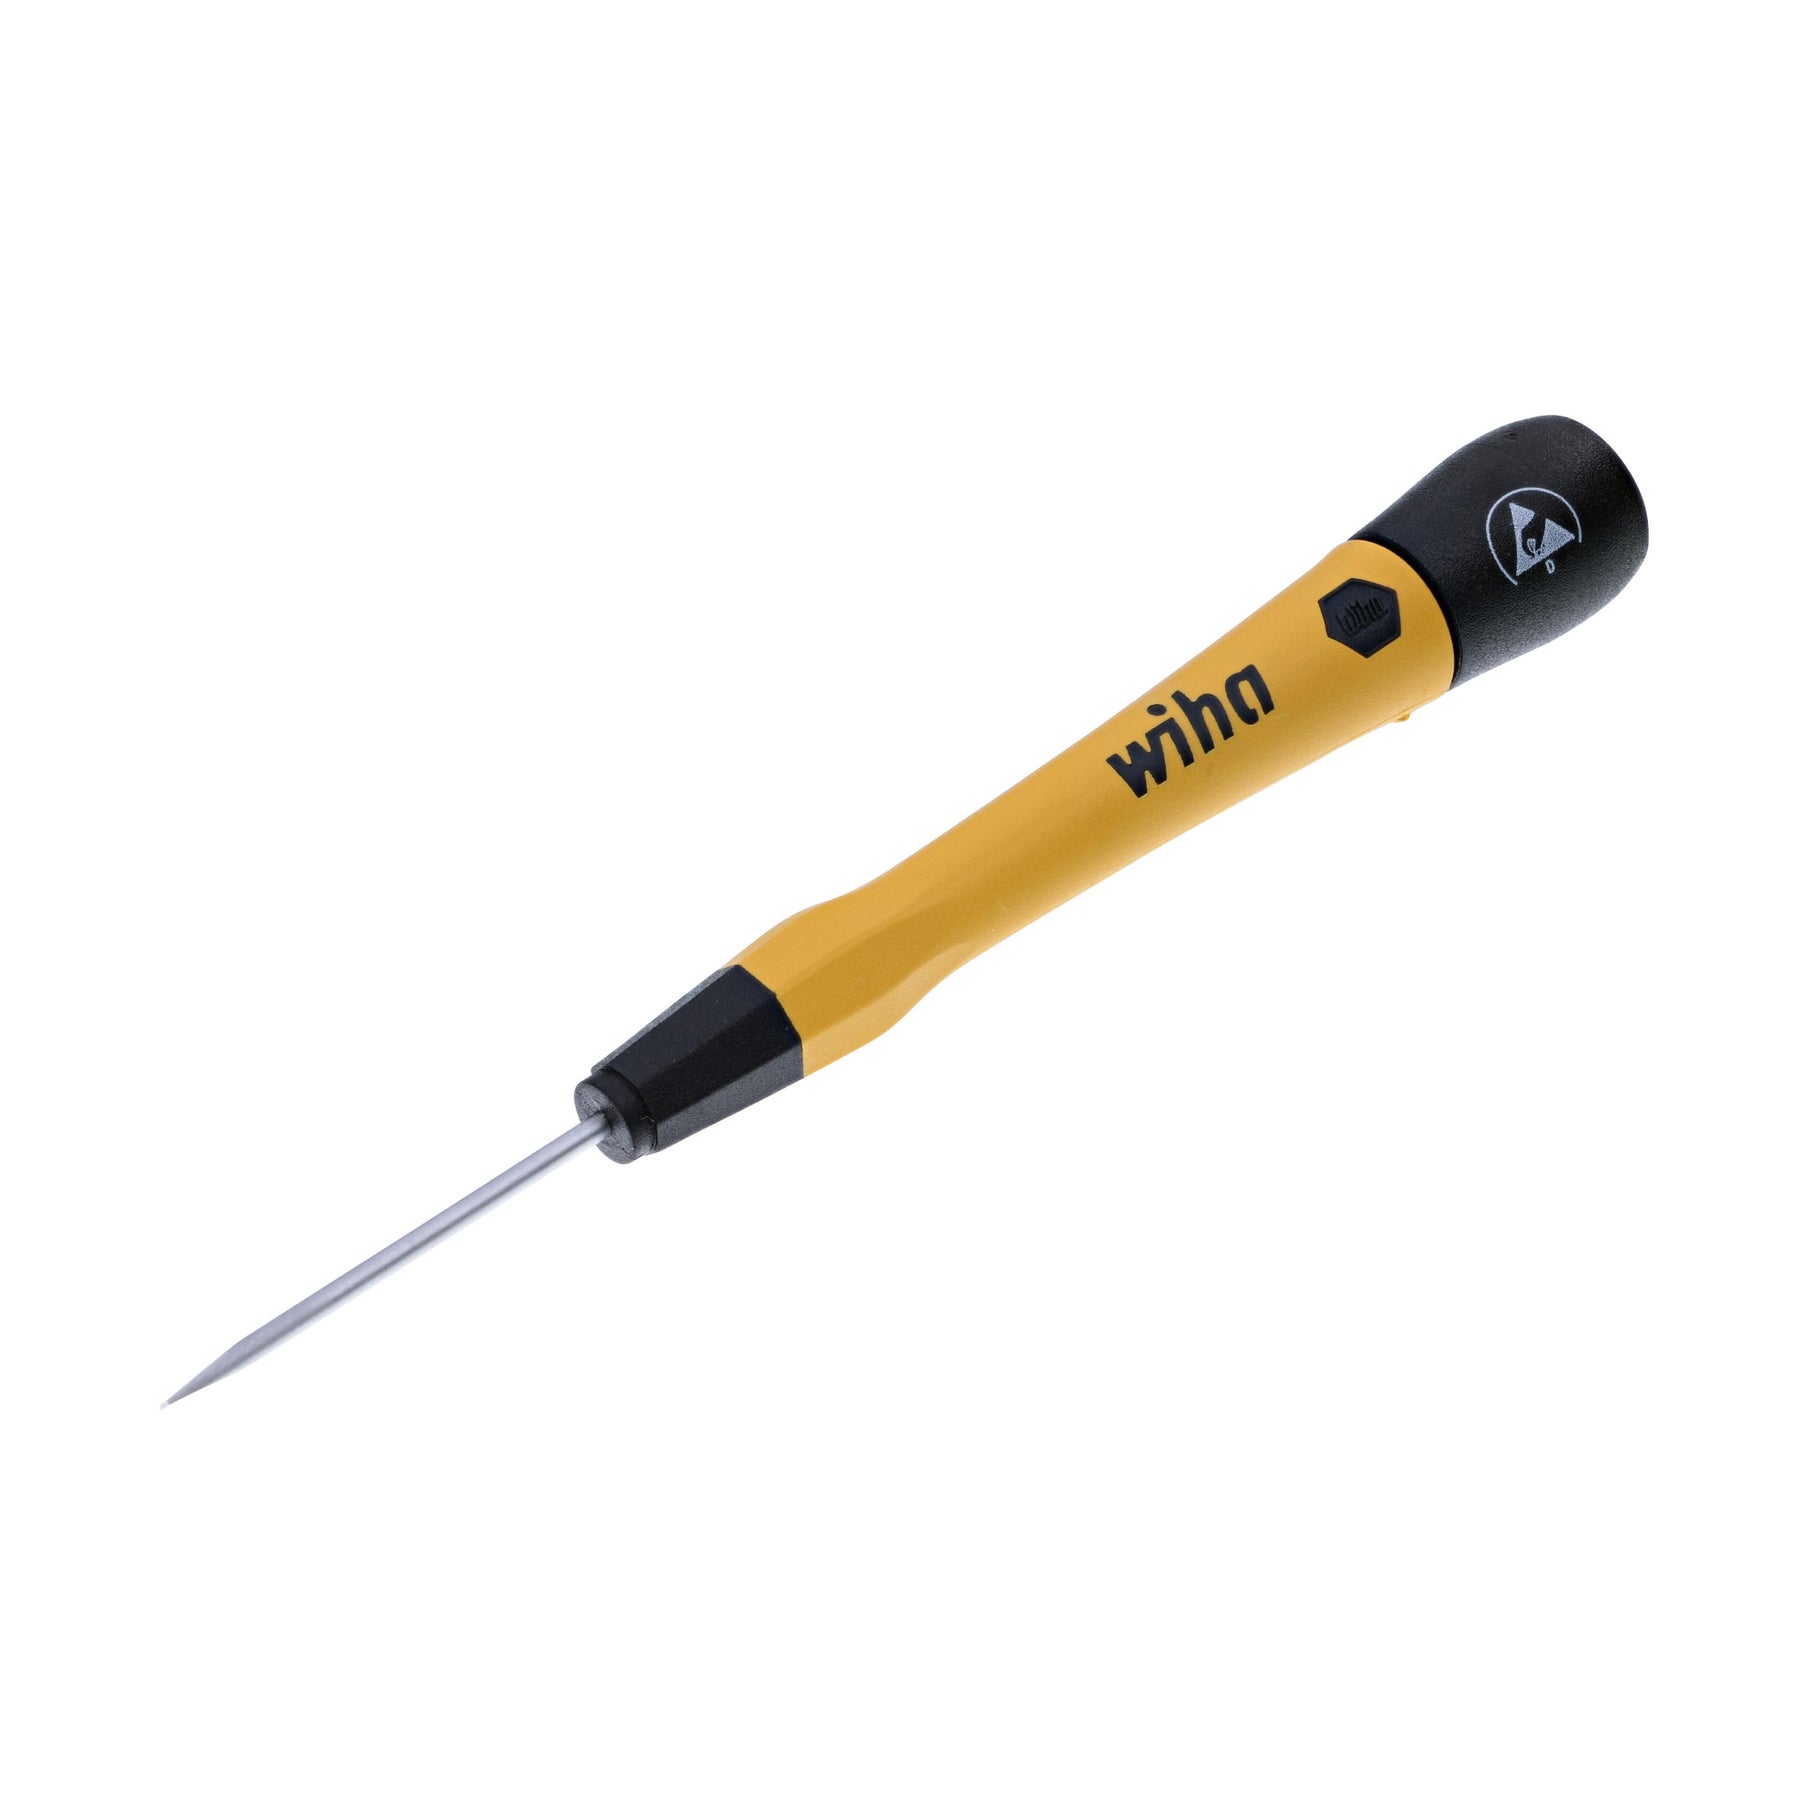 ESD Safe PicoFinish Precision Screwdriver - Slotted 2.0mm x 40mm